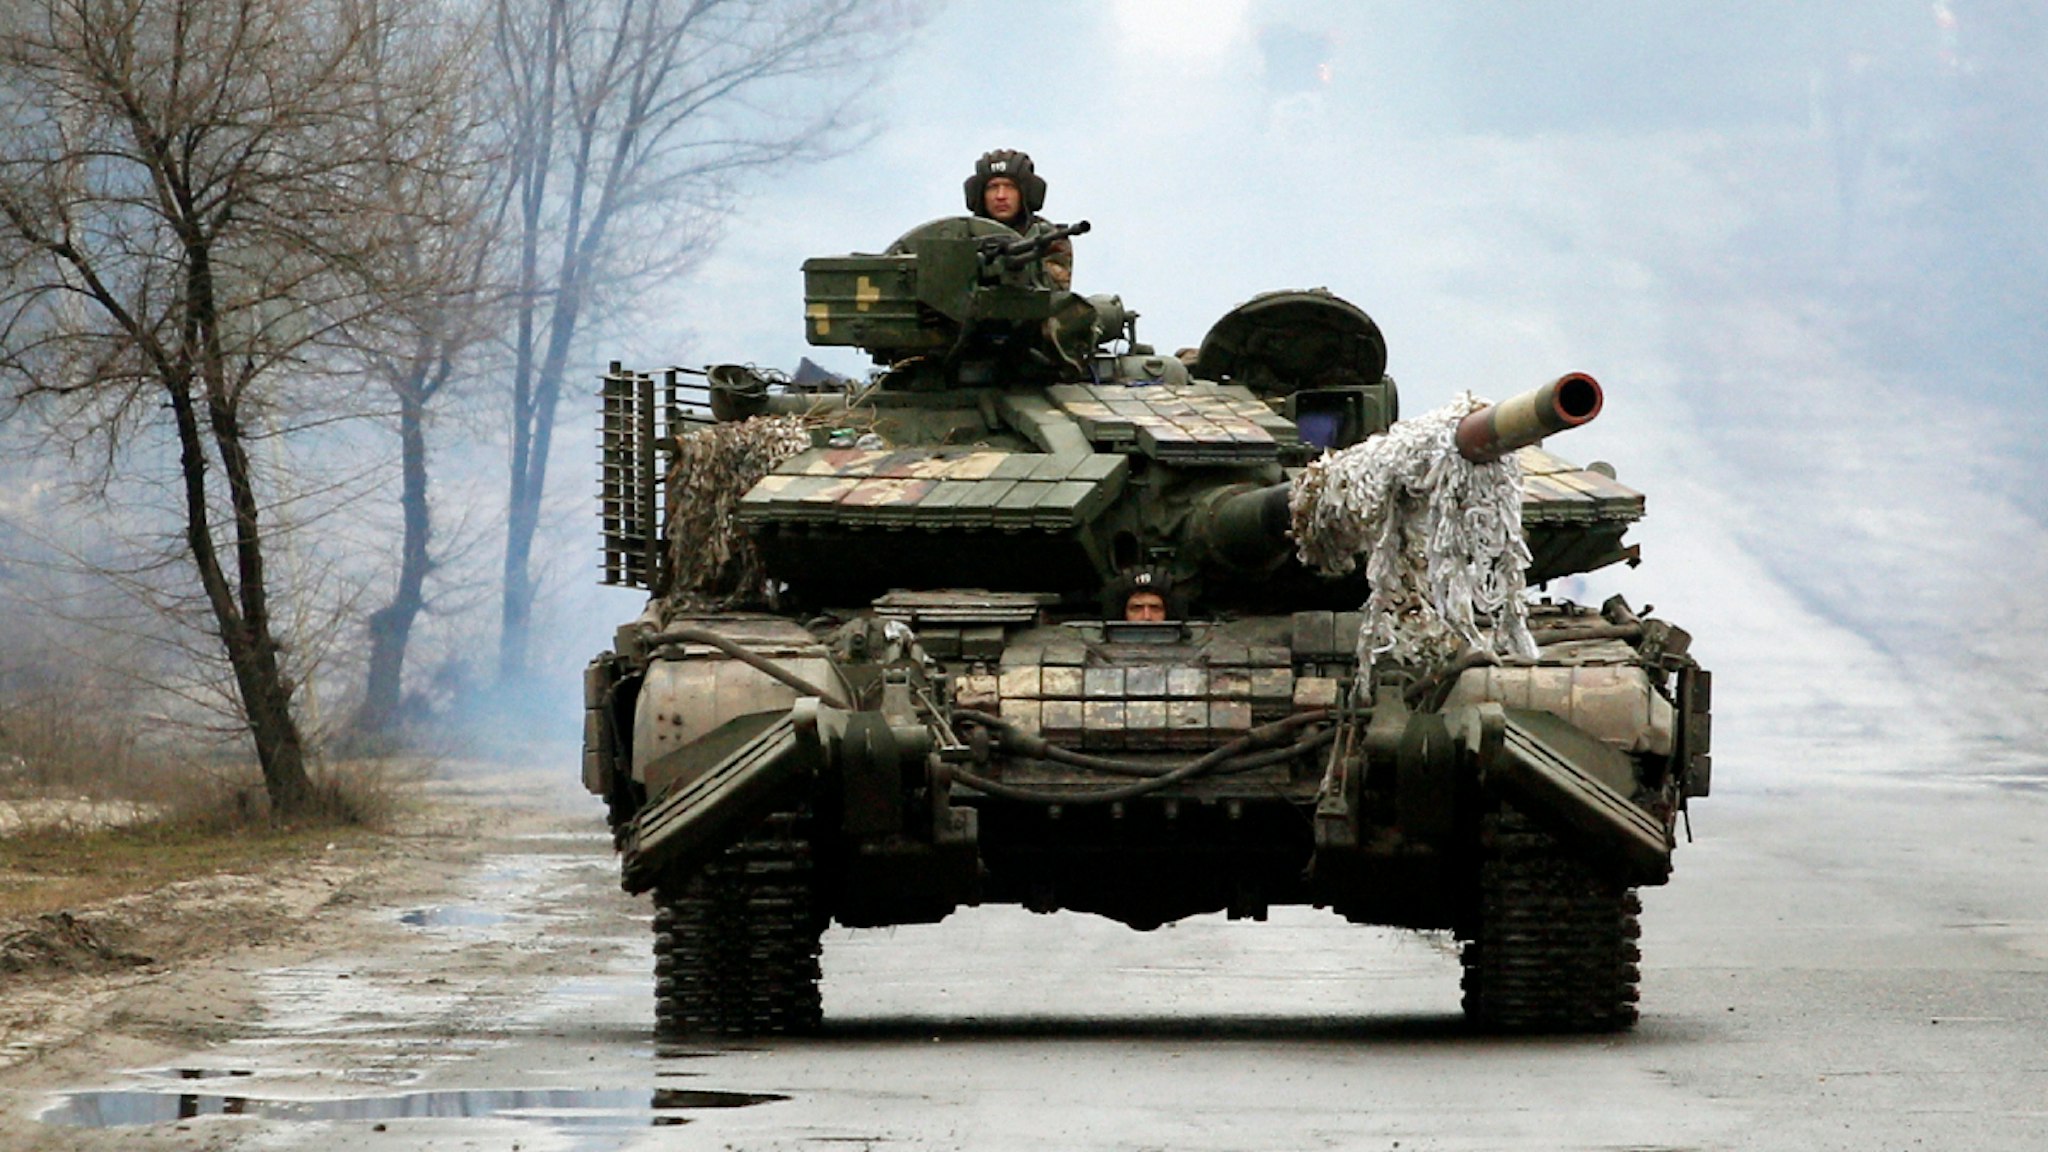 Ukrainian servicemen ride on tanks towards the front line with Russian forces in the Lugansk region of Ukraine on February 25, 2022.